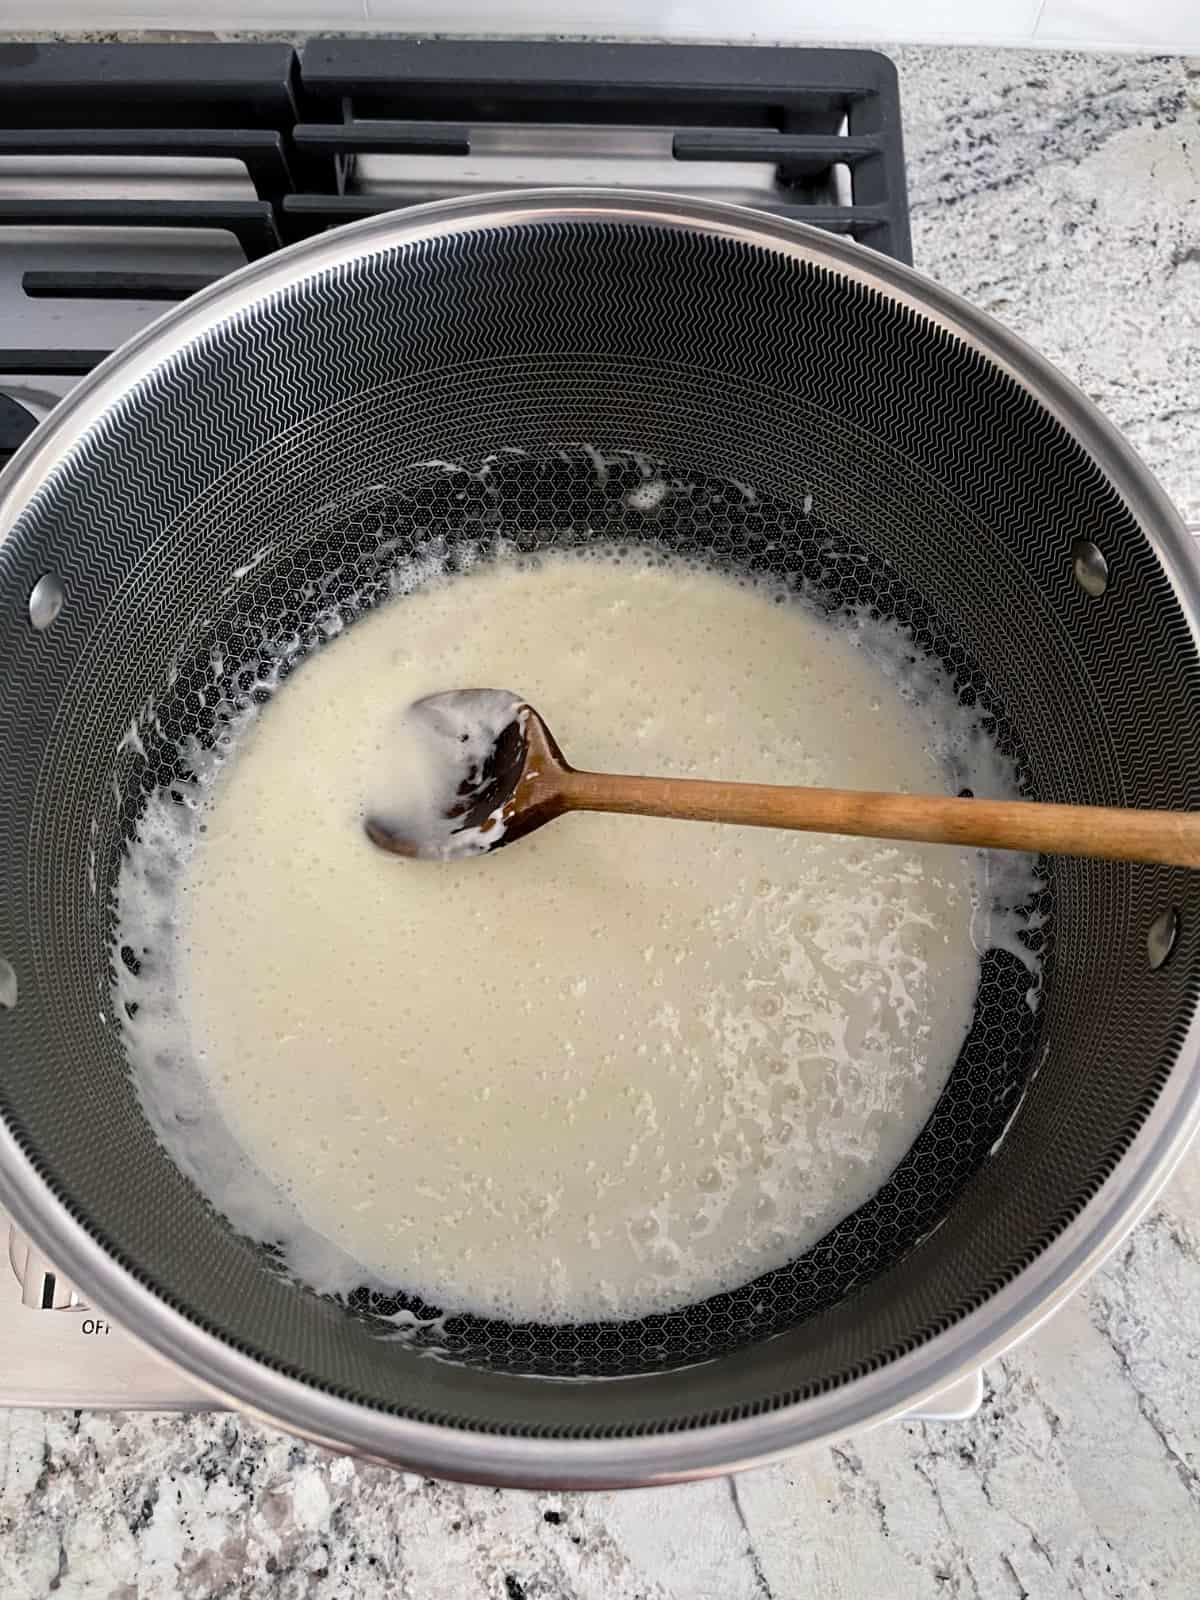 Stirring melted marshmallows in large saucepan with wooden spoon on stovetop.